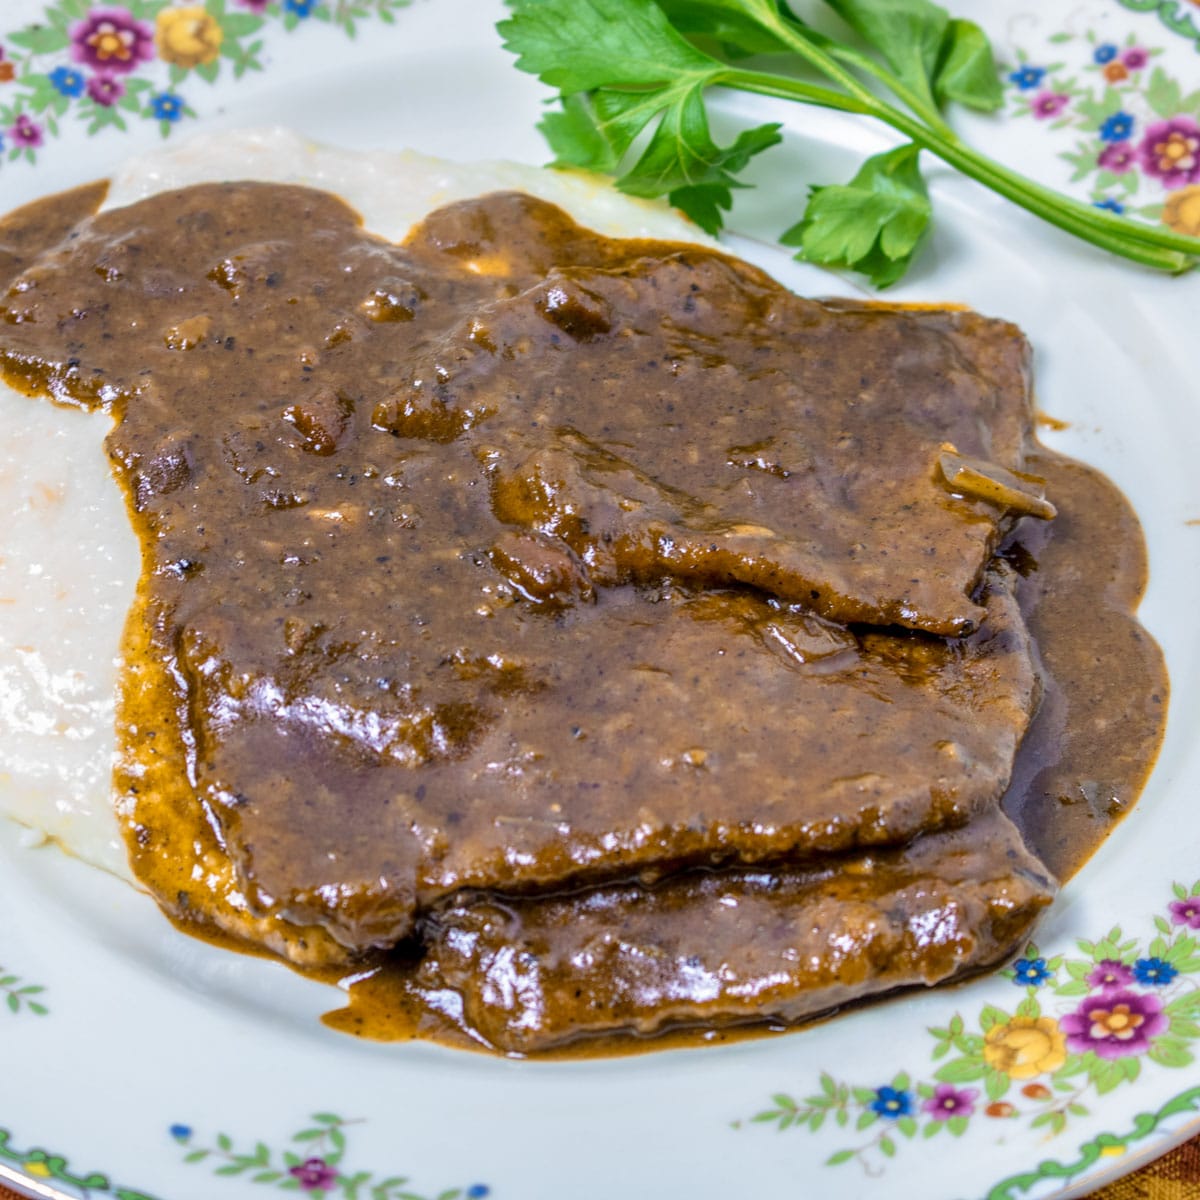 grillades with gravy over grits on a plate